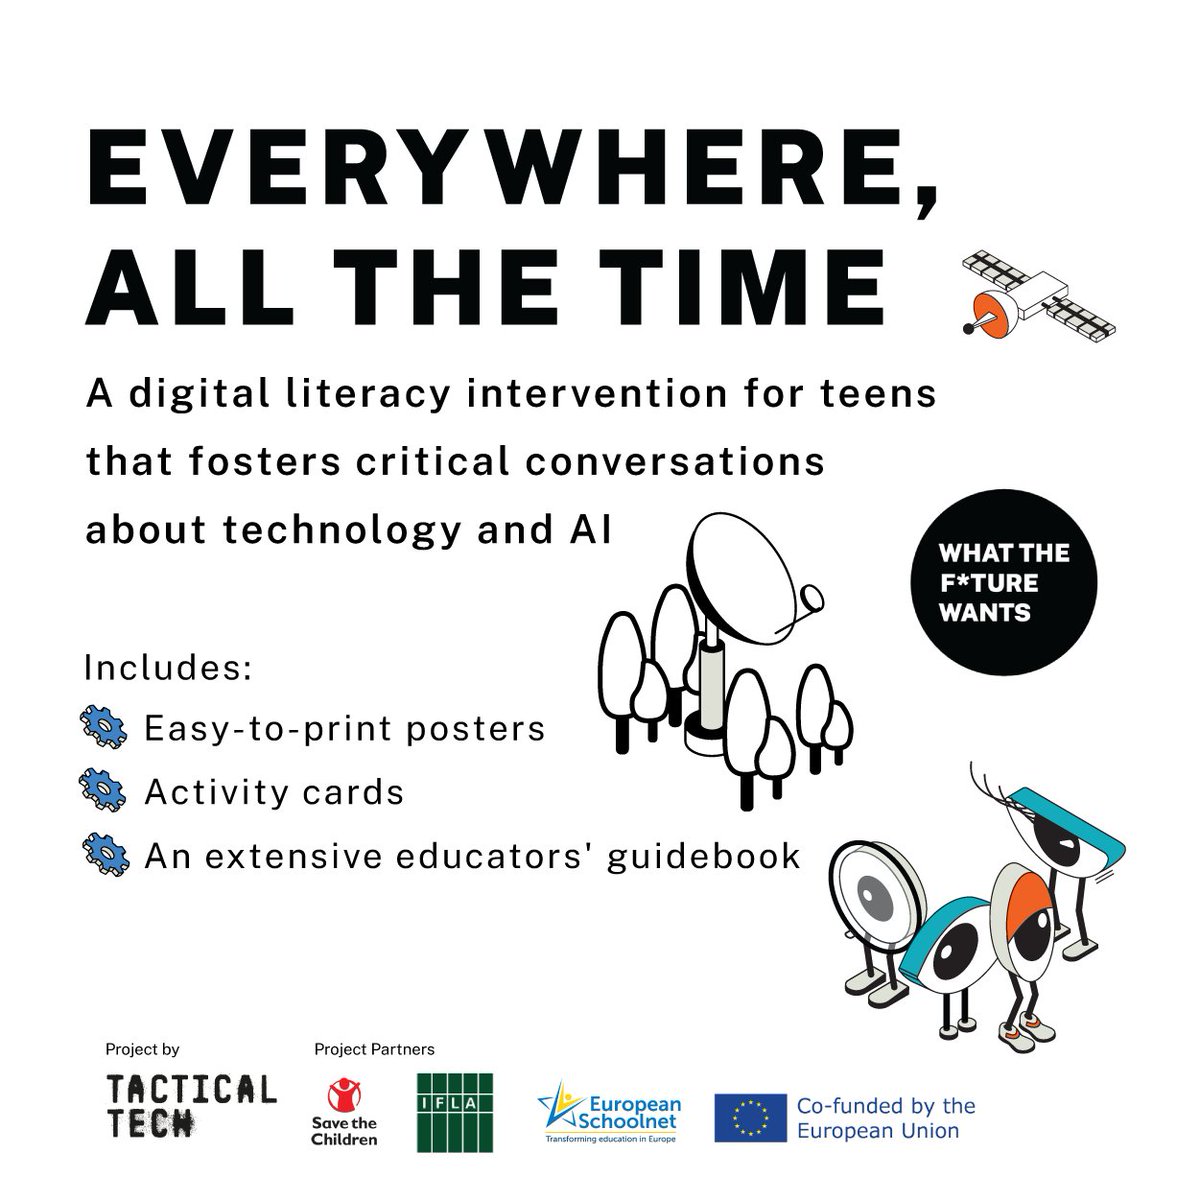 🔊Calling all educators and anyone working with youth! Discover the playful #DigitalLiteracy intervention 'Everywhere, All the Time' and start promoting conversations among teens about tech, AI, and their impacts. 🤖Want to access the resources? theglassroom.org/youth/everywhe…